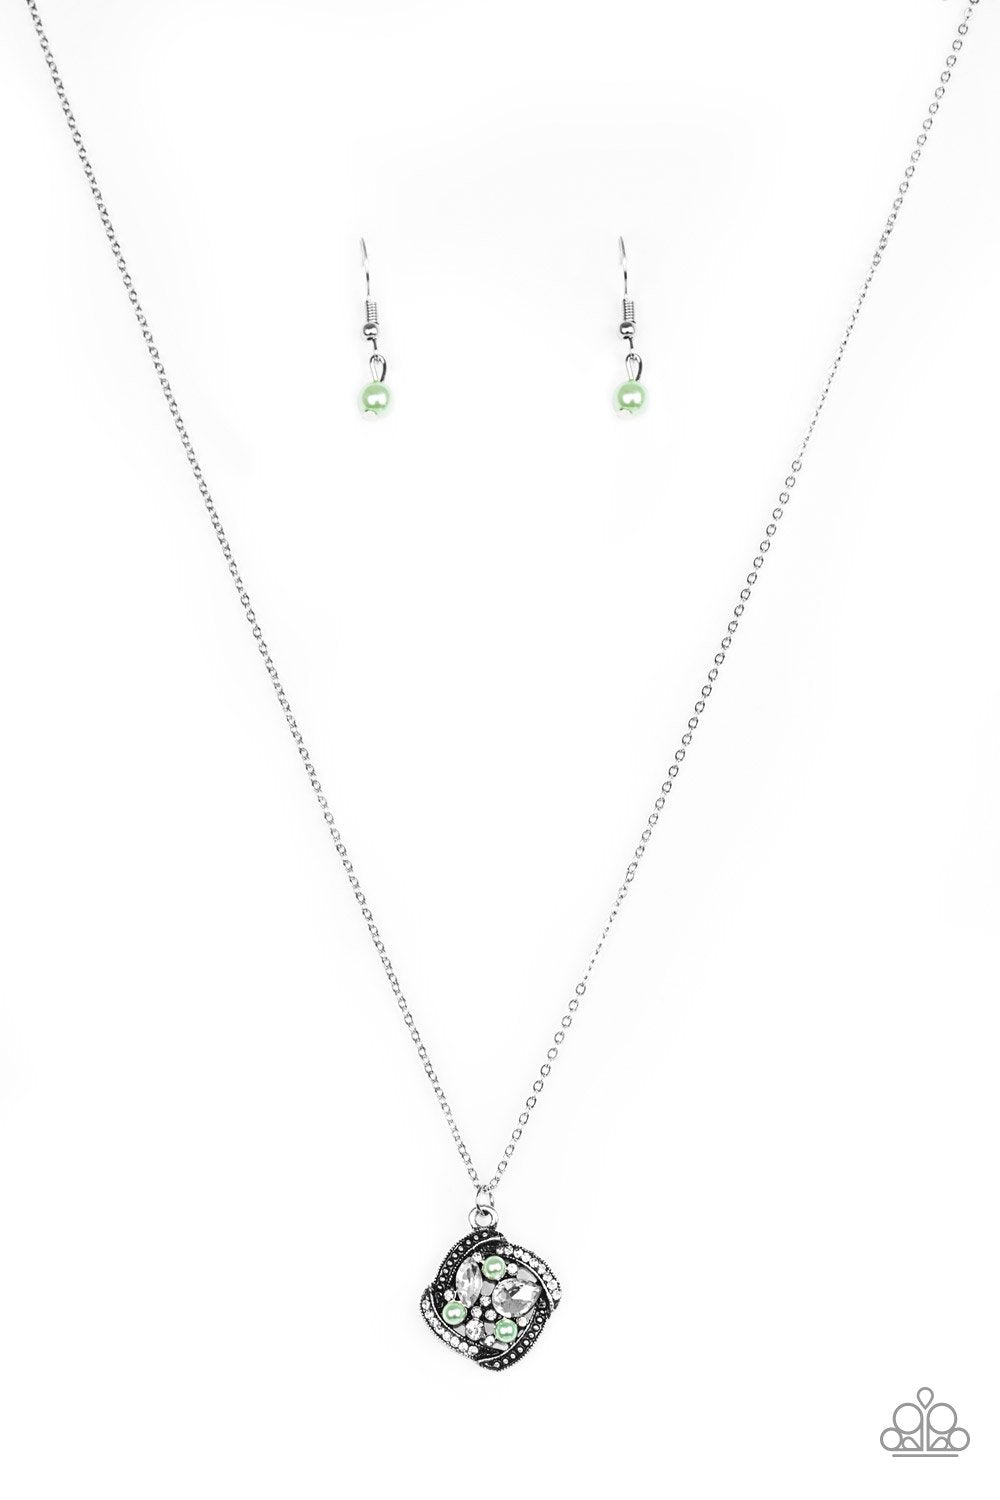 Speaking of Timeless Silver and Green Necklace - Paparazzi Accessories-CarasShop.com - $5 Jewelry by Cara Jewels